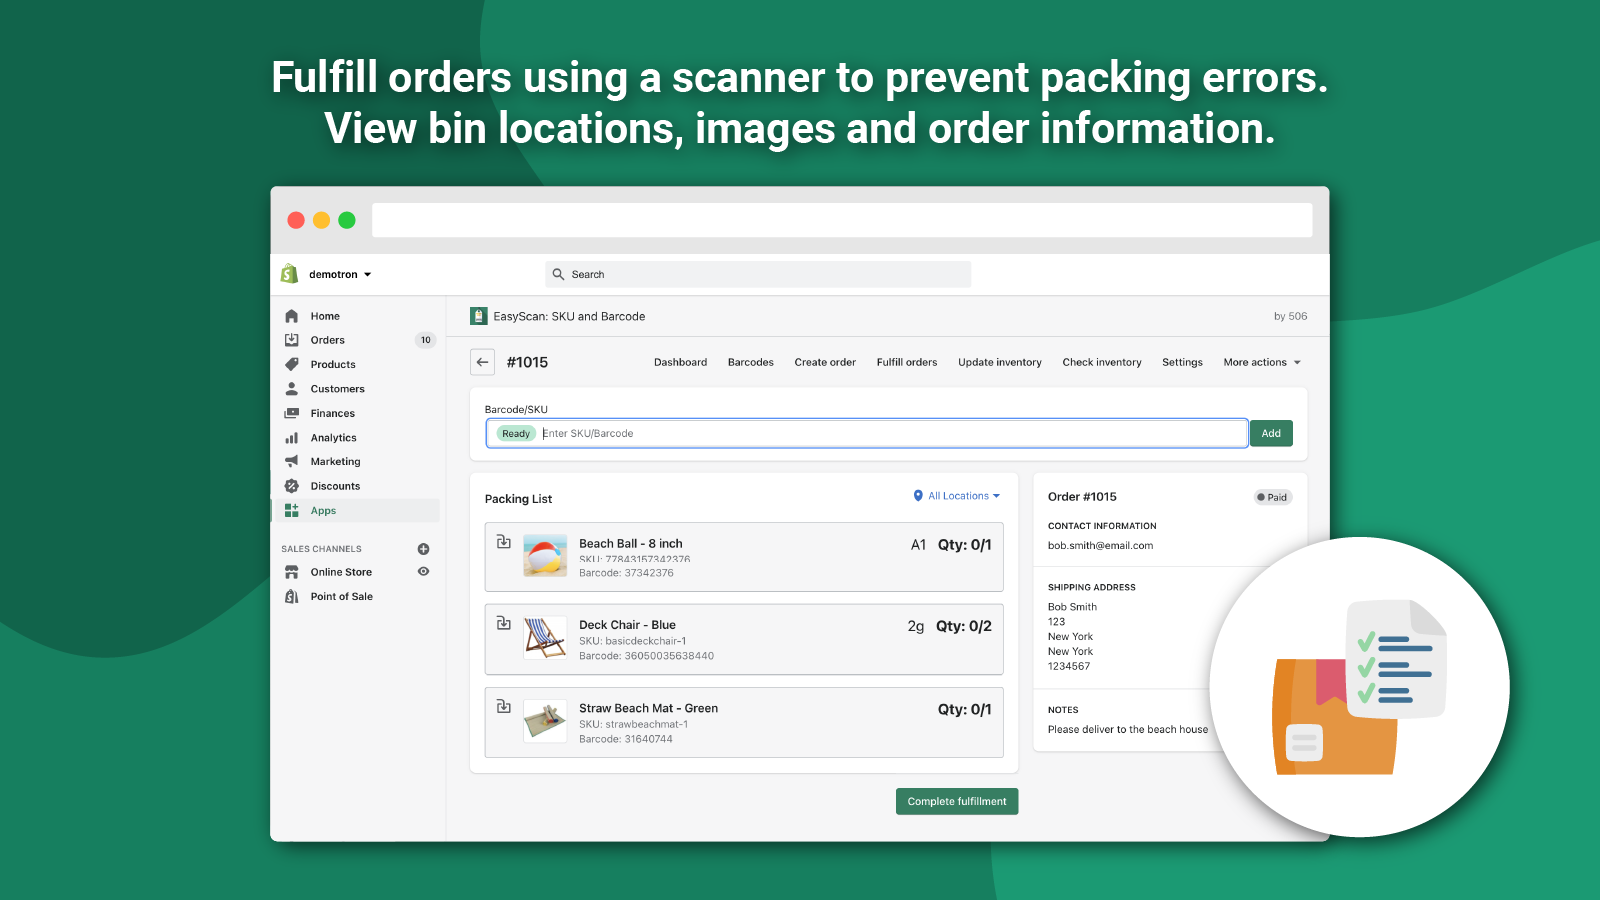 Fulfill orders using a scanner to prevent packing errors